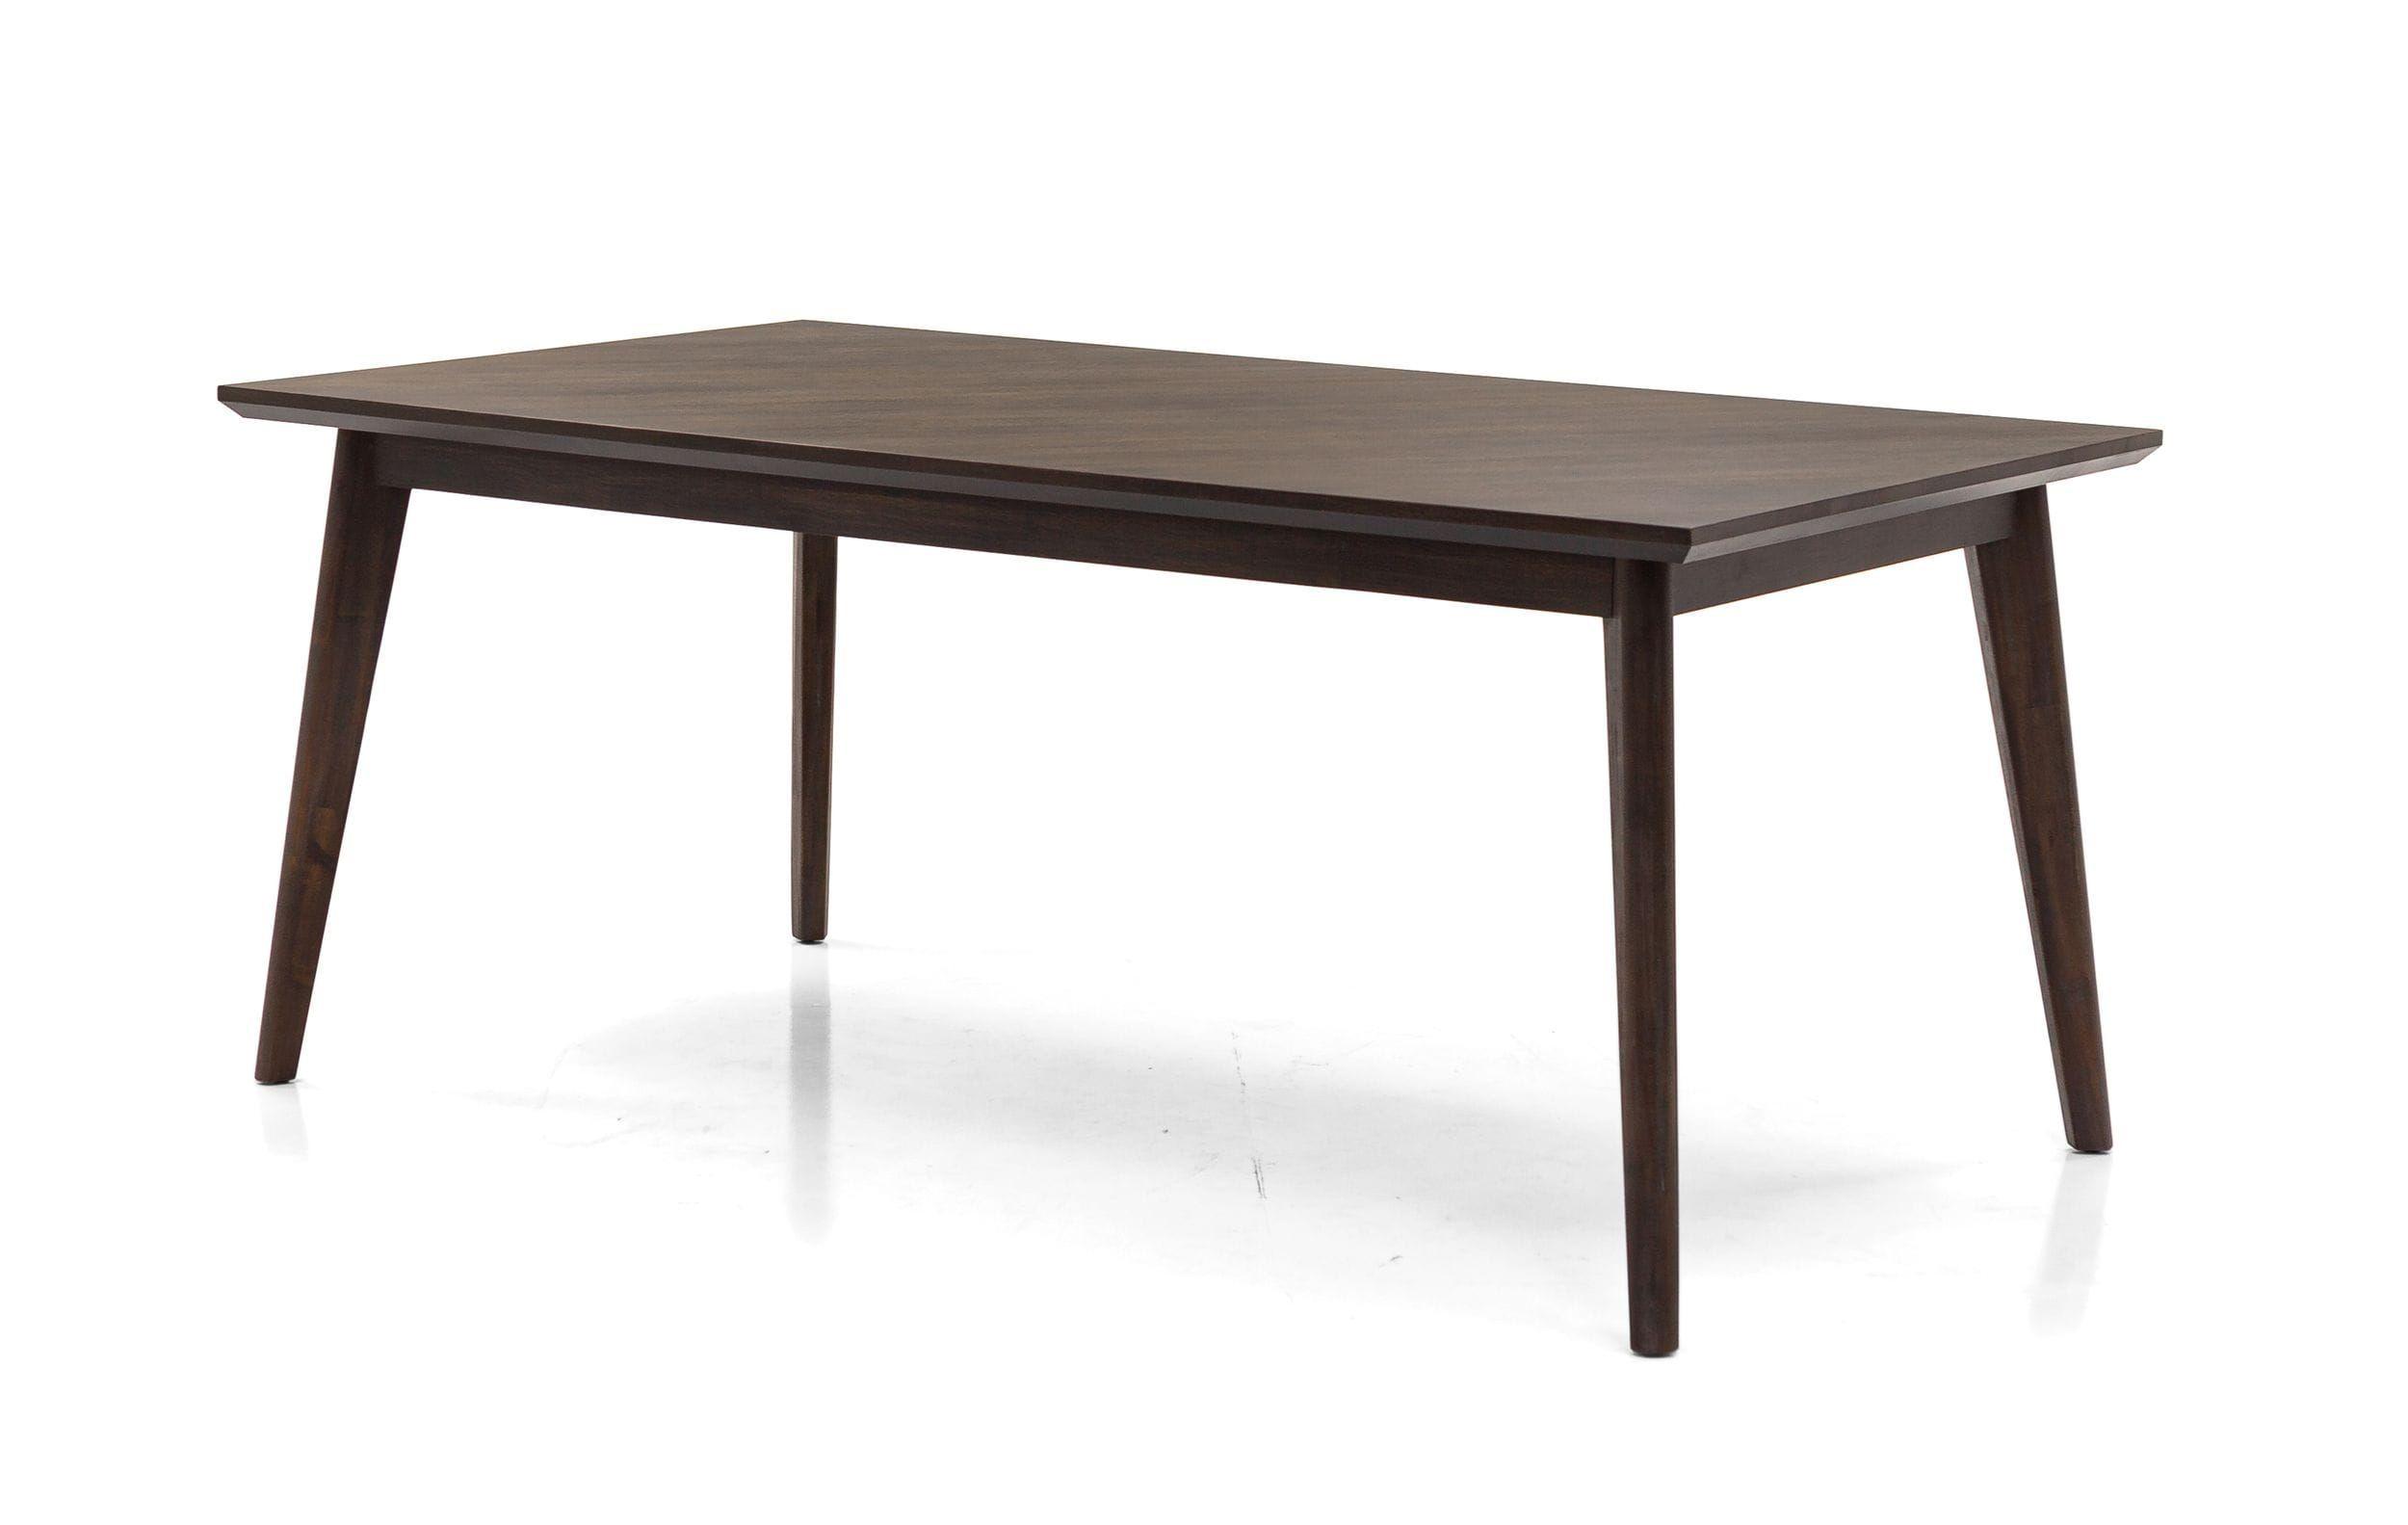 Contemporary, Modern Dining Table Roger VGWDSTHLDT210-BRN-DT in Brown 